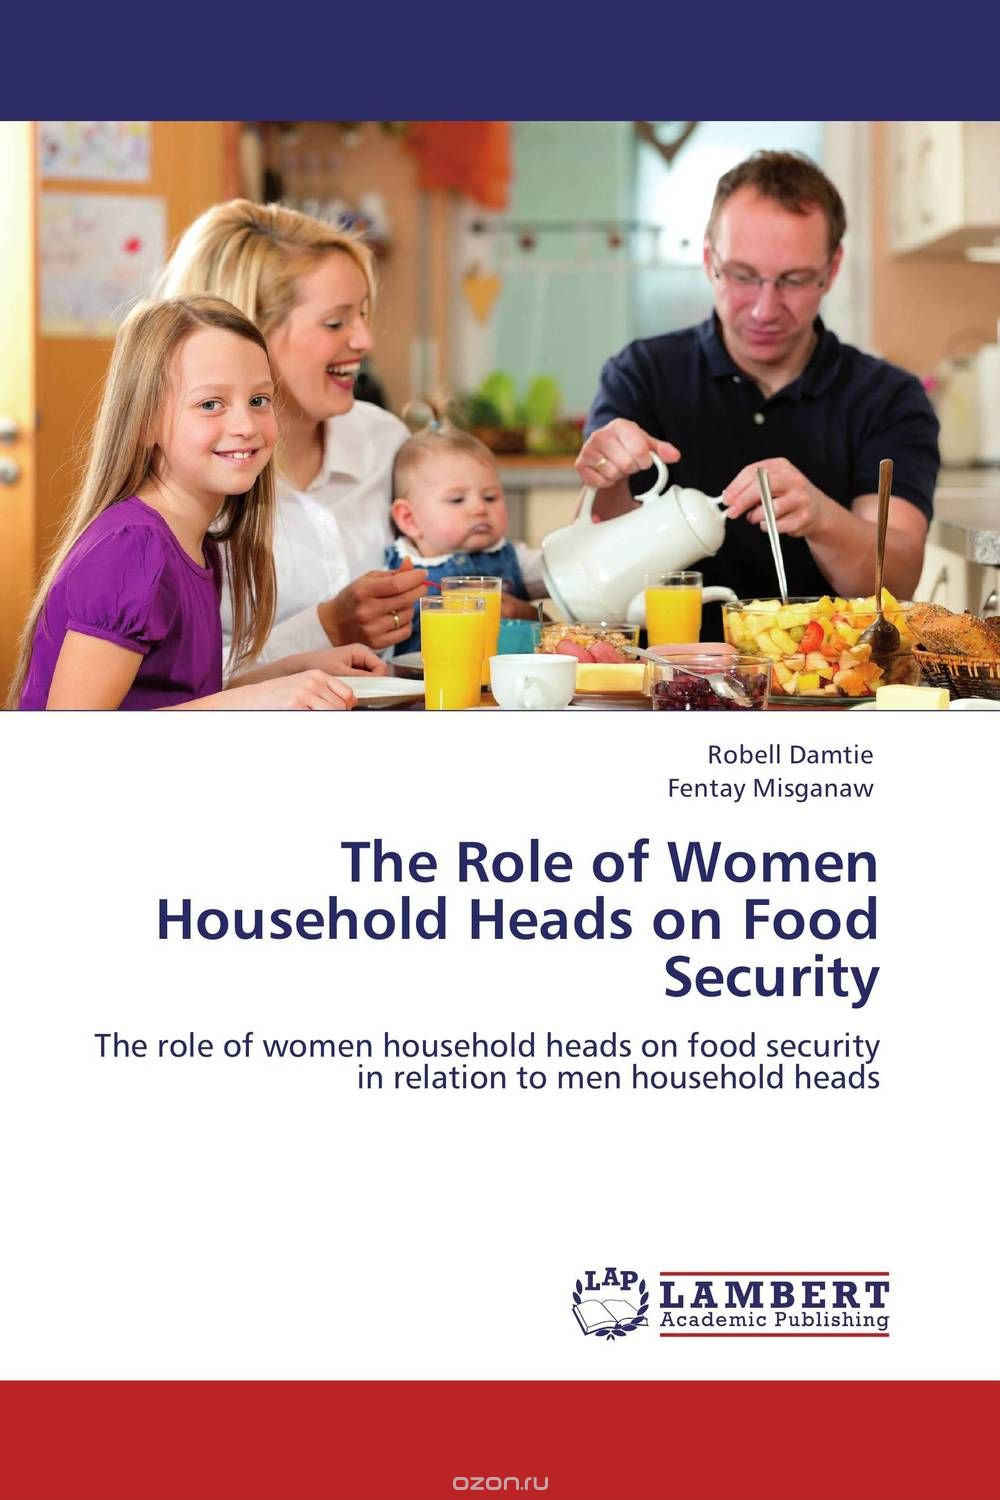 The Role of Women Household Heads on Food Security